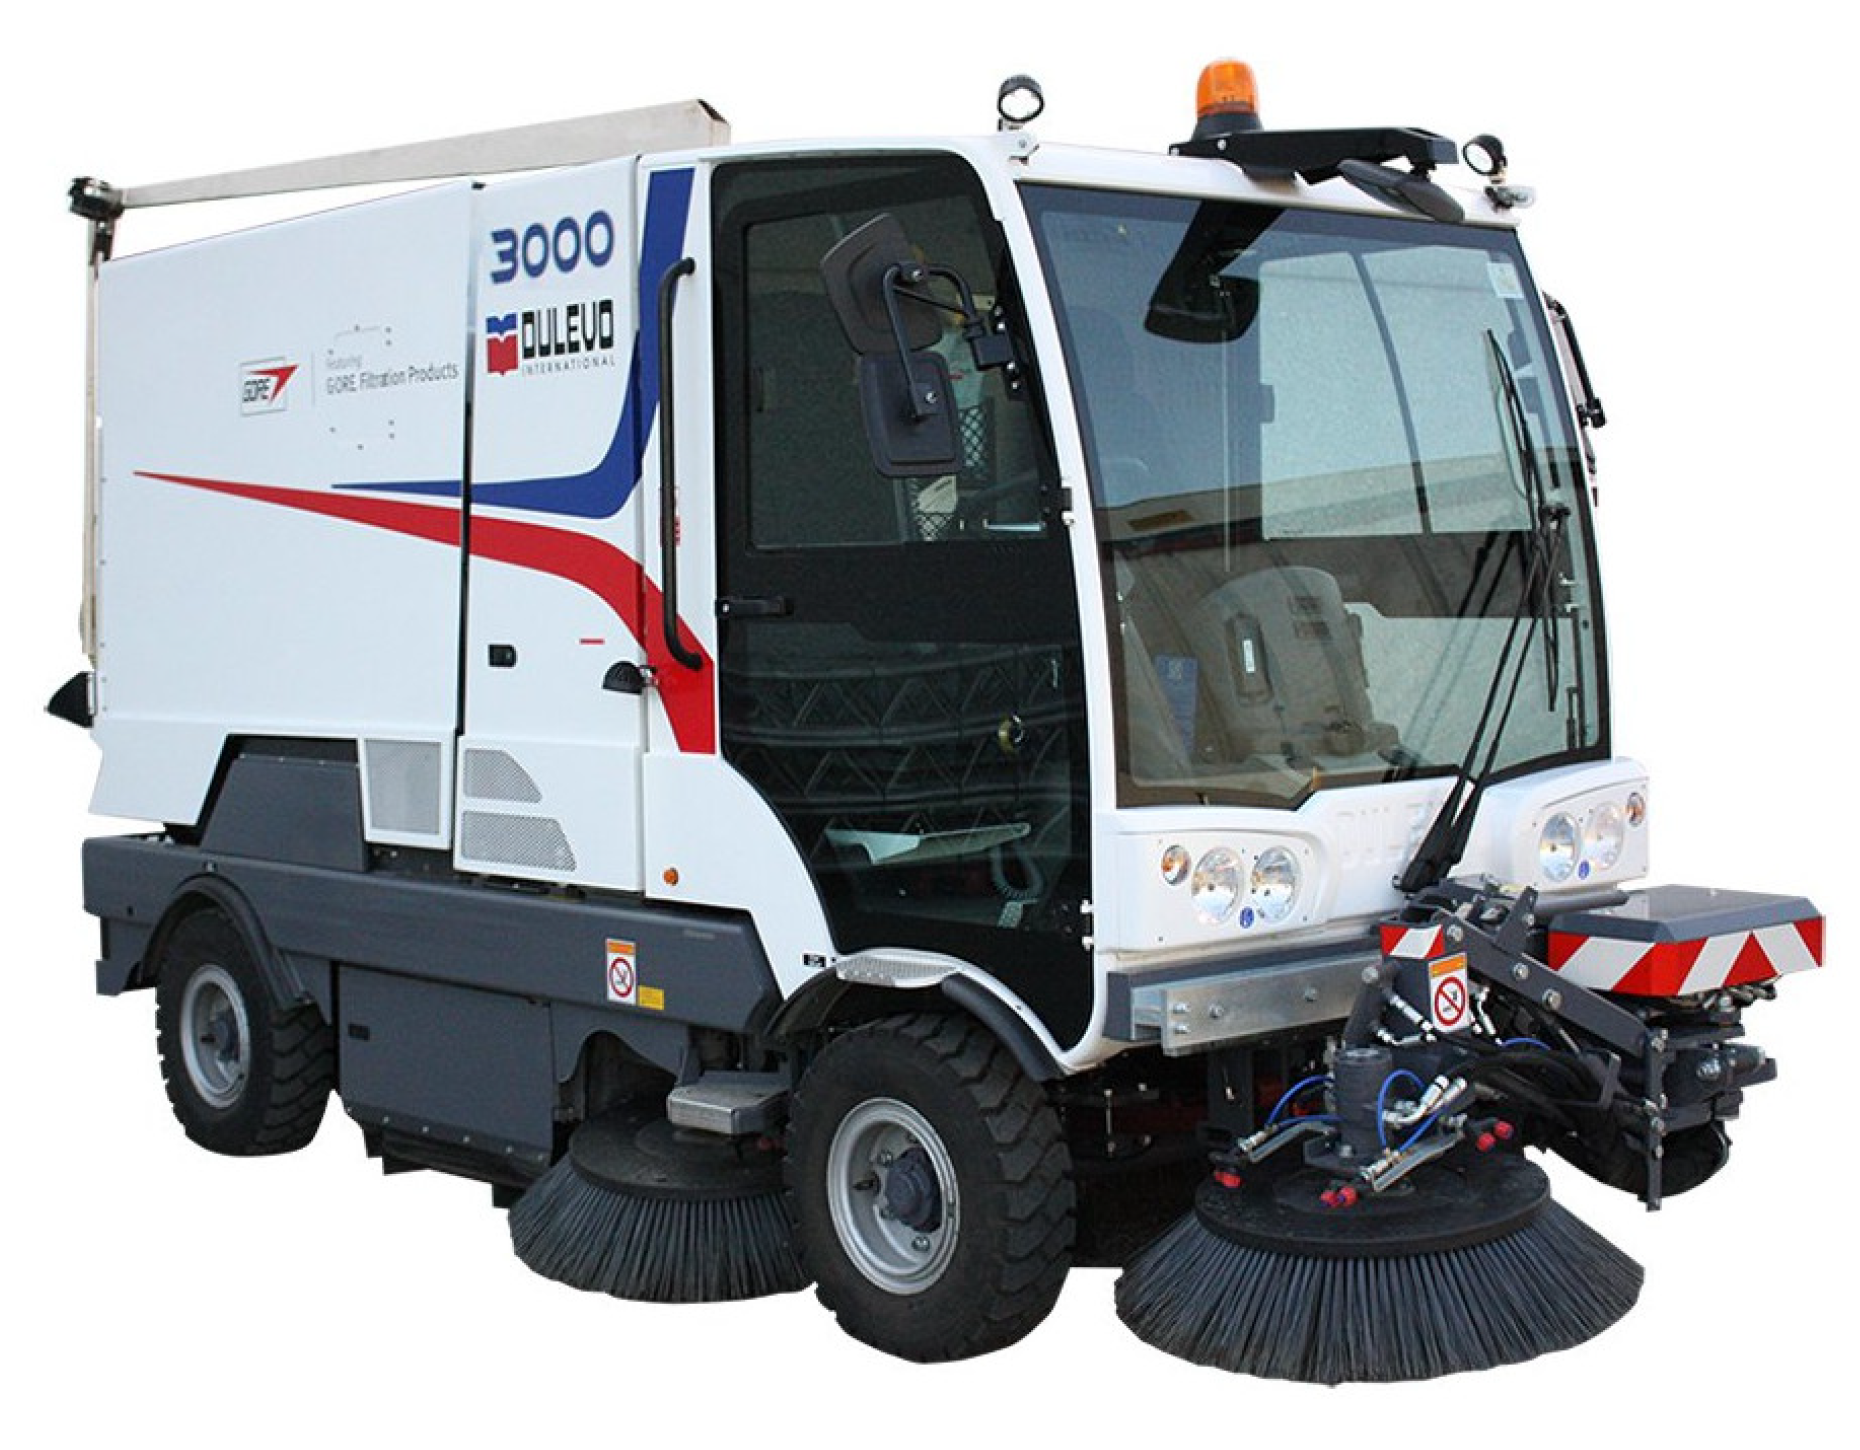 Applied Sciences | Free Full-Text | An Energy Saving Road Sweeper Using  Deep Vision for Garbage Detection | HTML